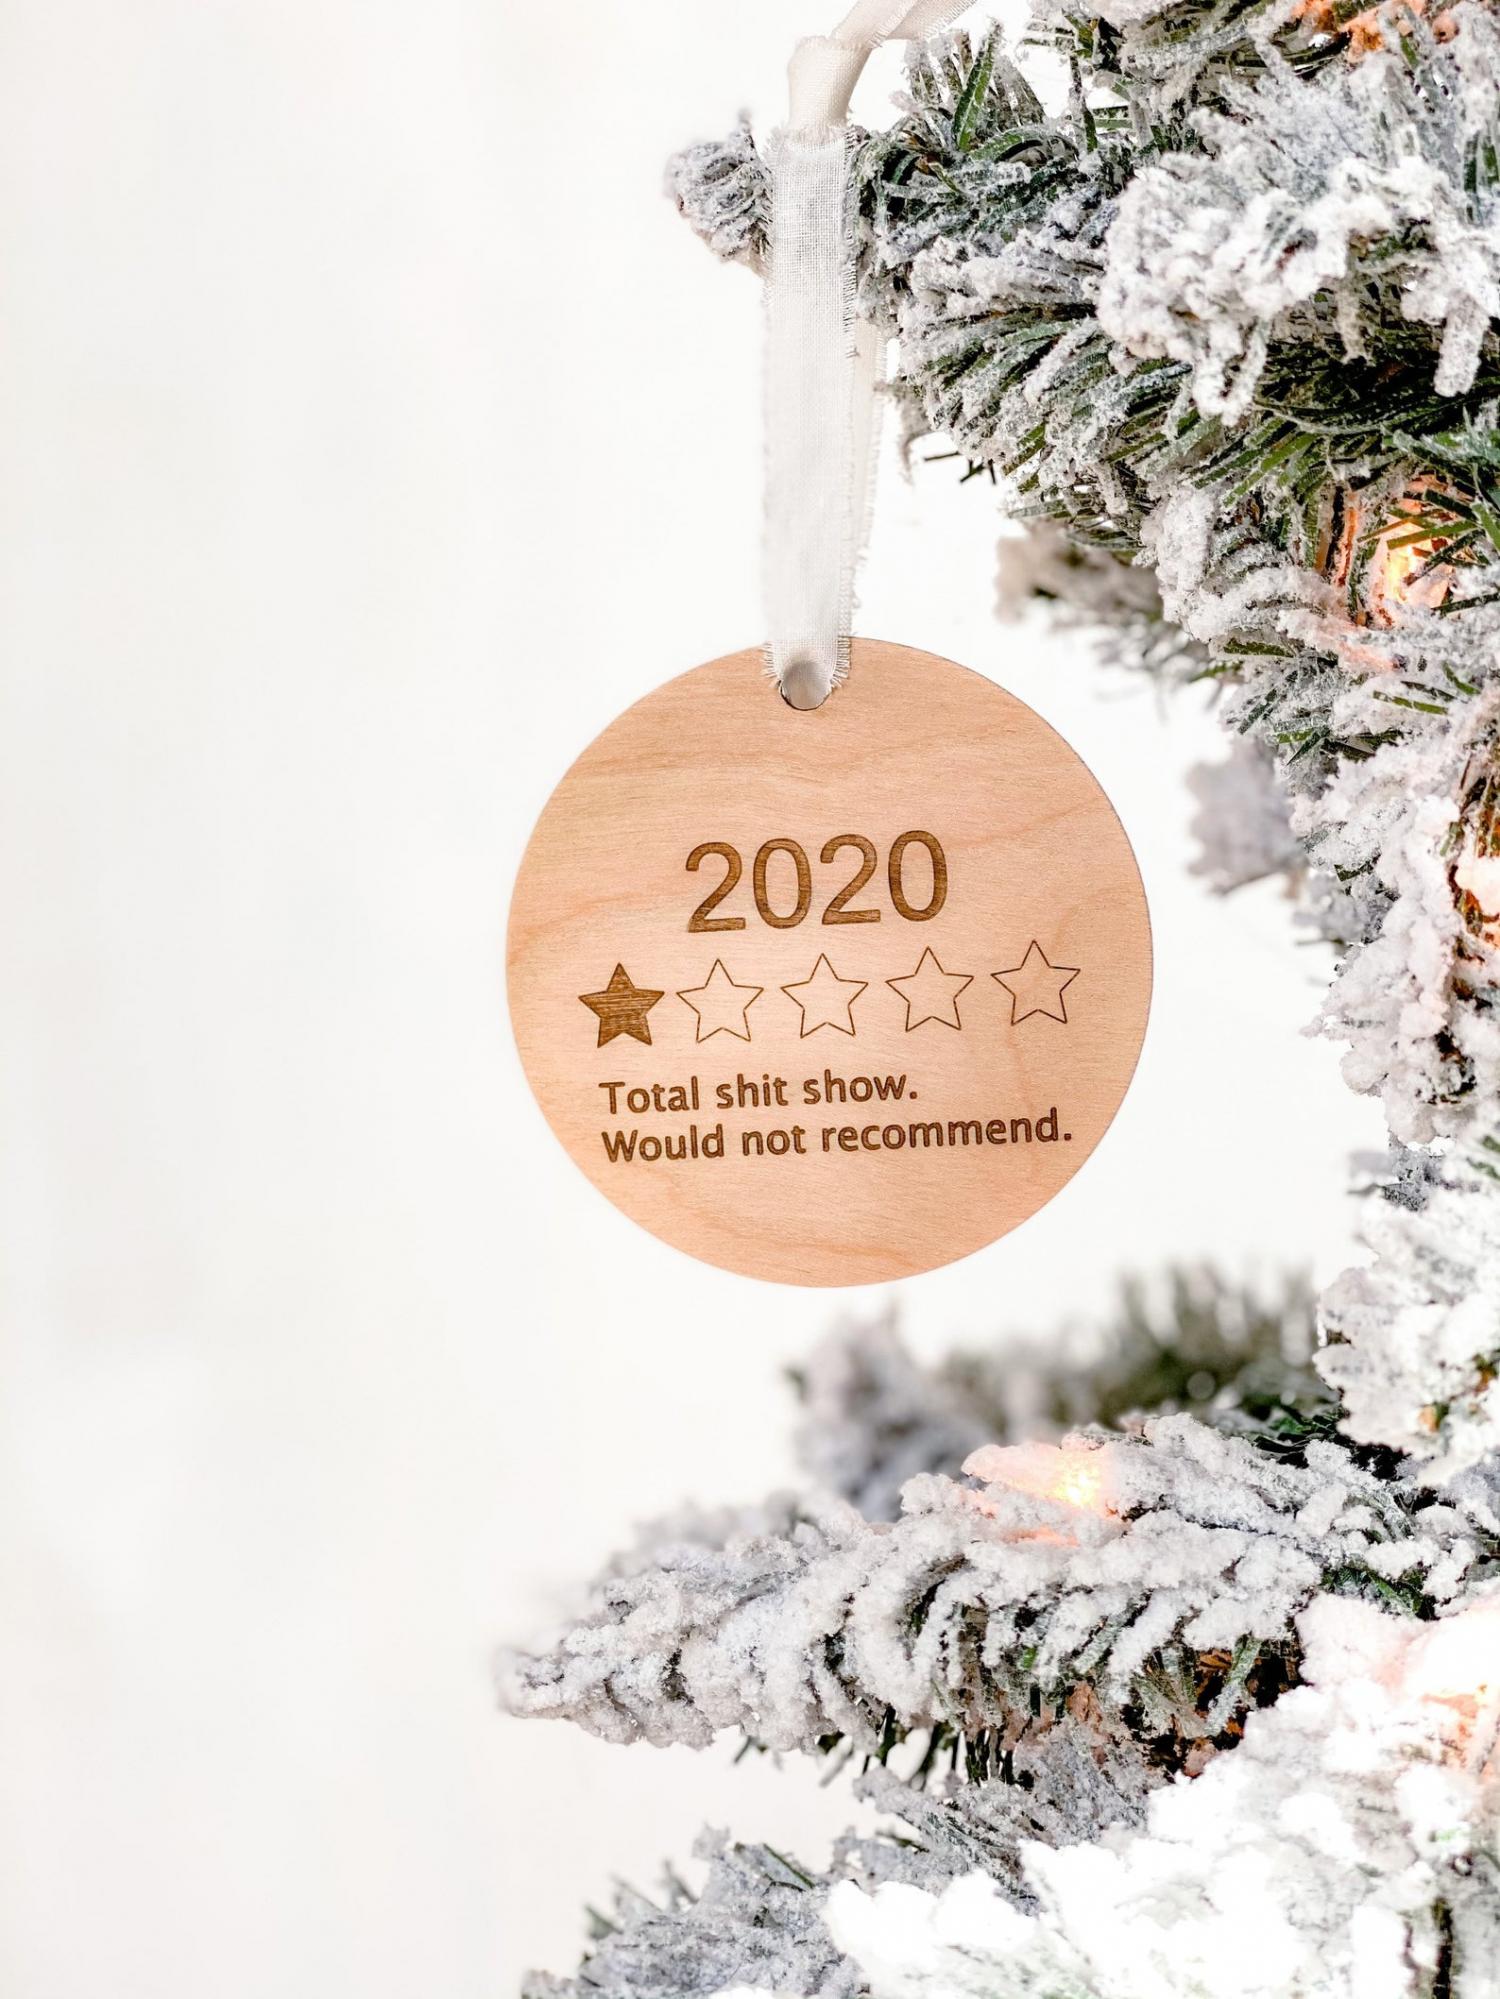 Funny 2020 Christmas Ornament - Best hilarious 2020 ornaments